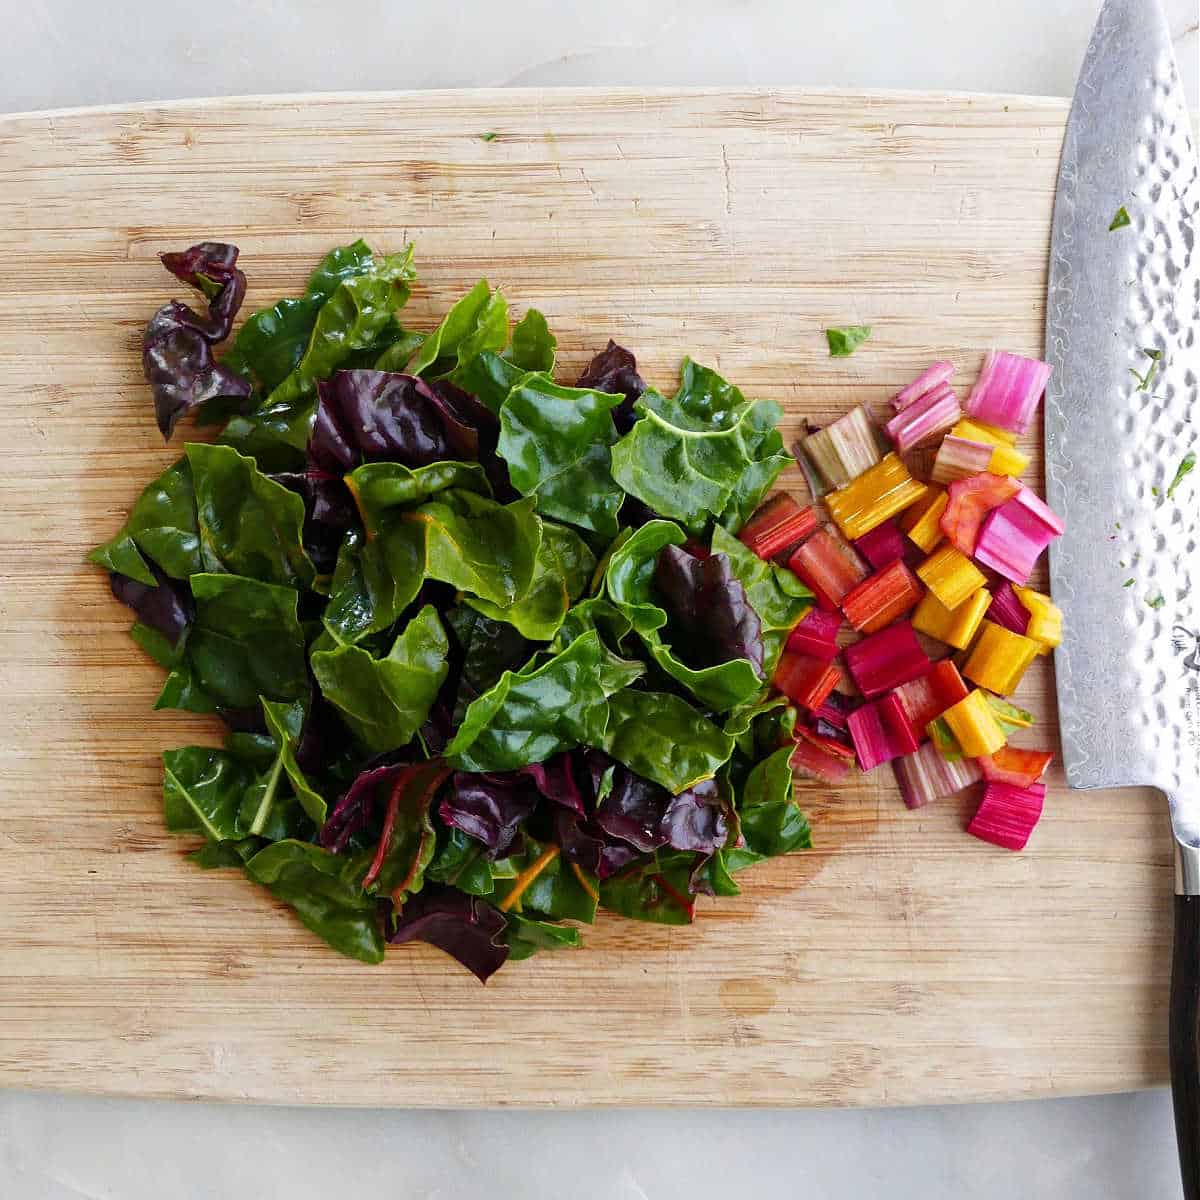 Swiss chard leaves and stems cut up on a cutting board with a knife